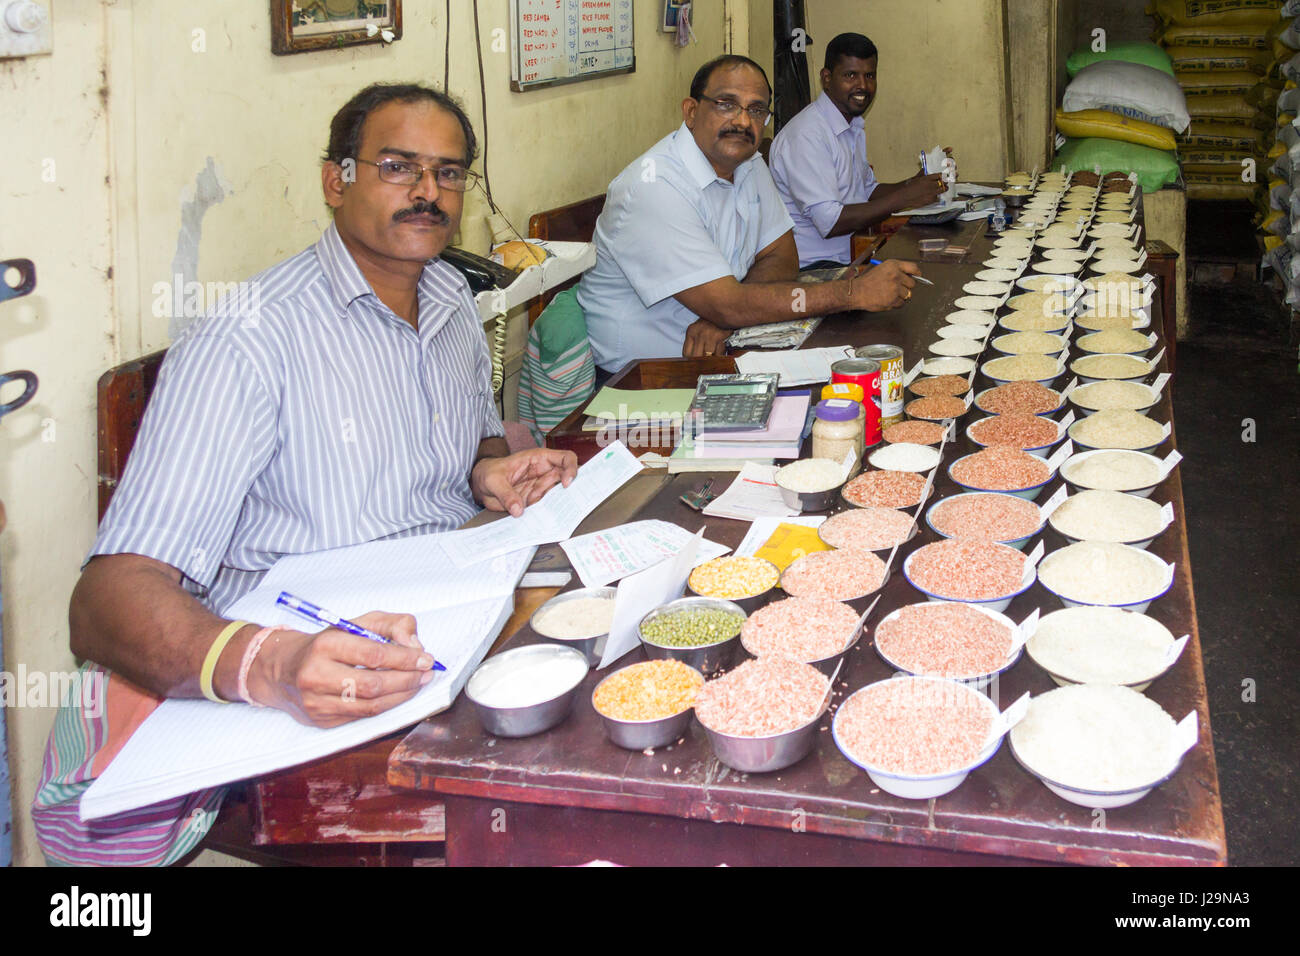 Rice traders at work in their office in Pettah district, Colombo, Sri Lanka Stock Photo